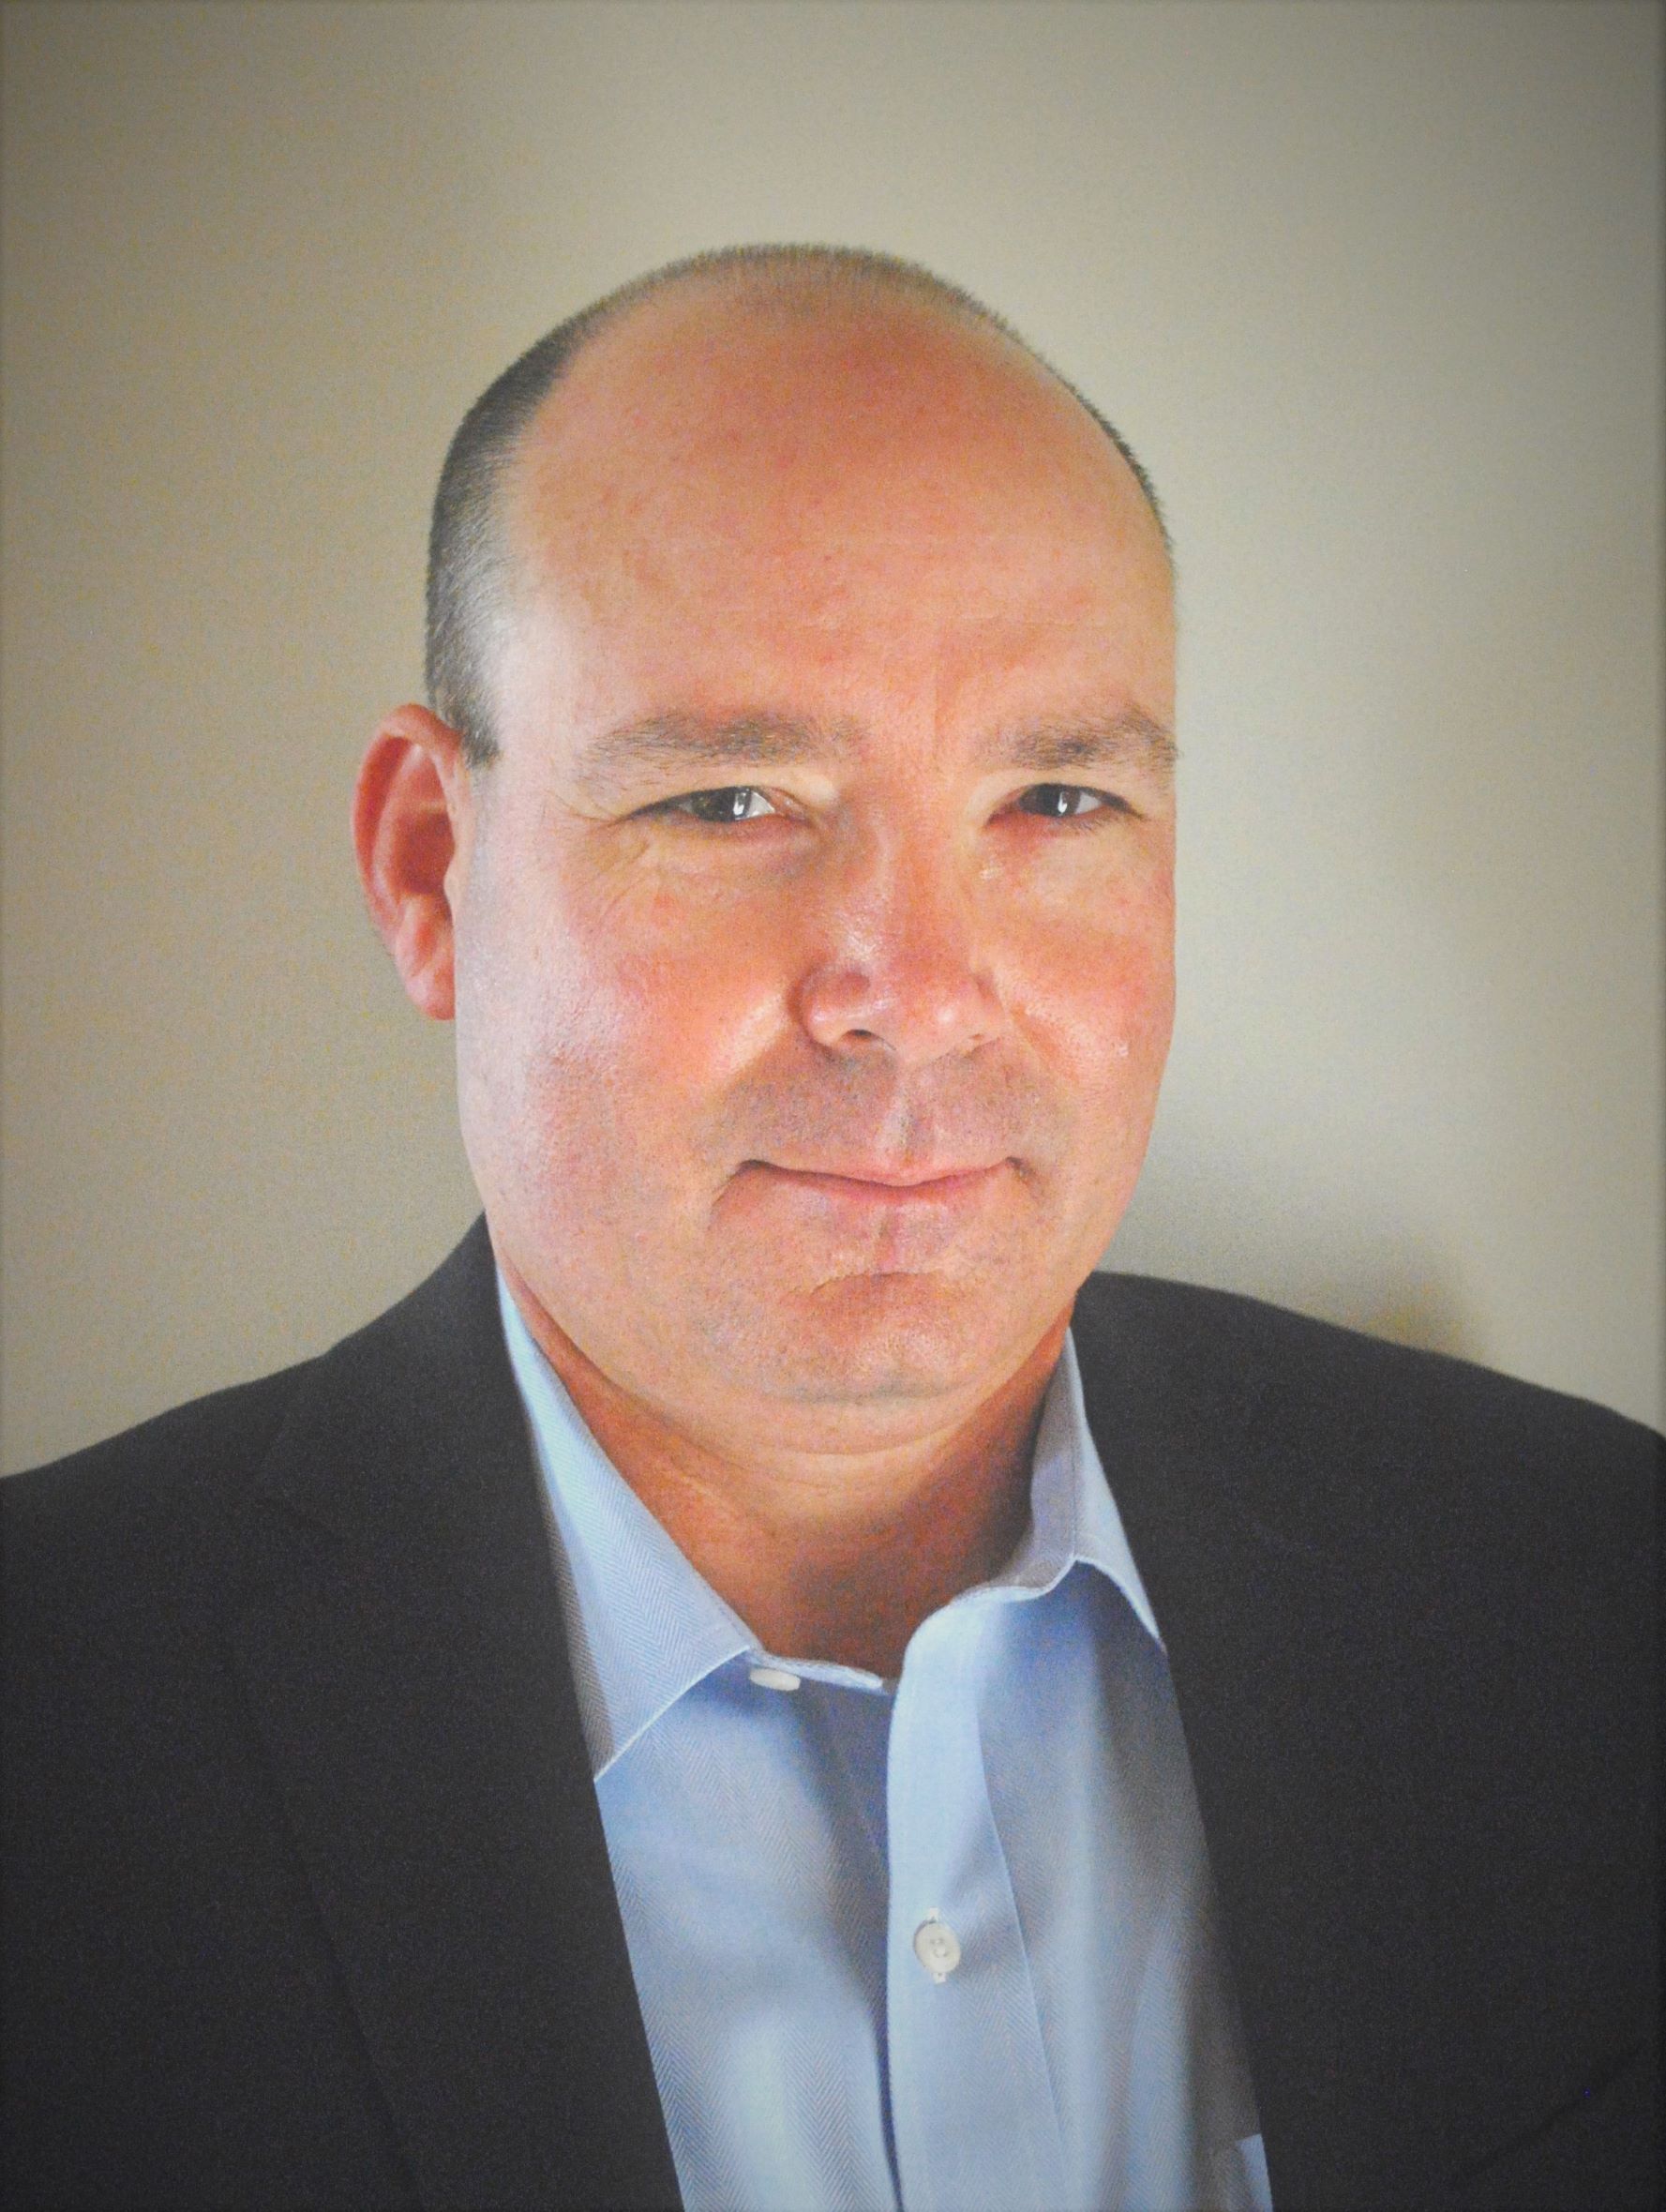 Chris Goade of 360 Consulting is a member of XPX Dallas